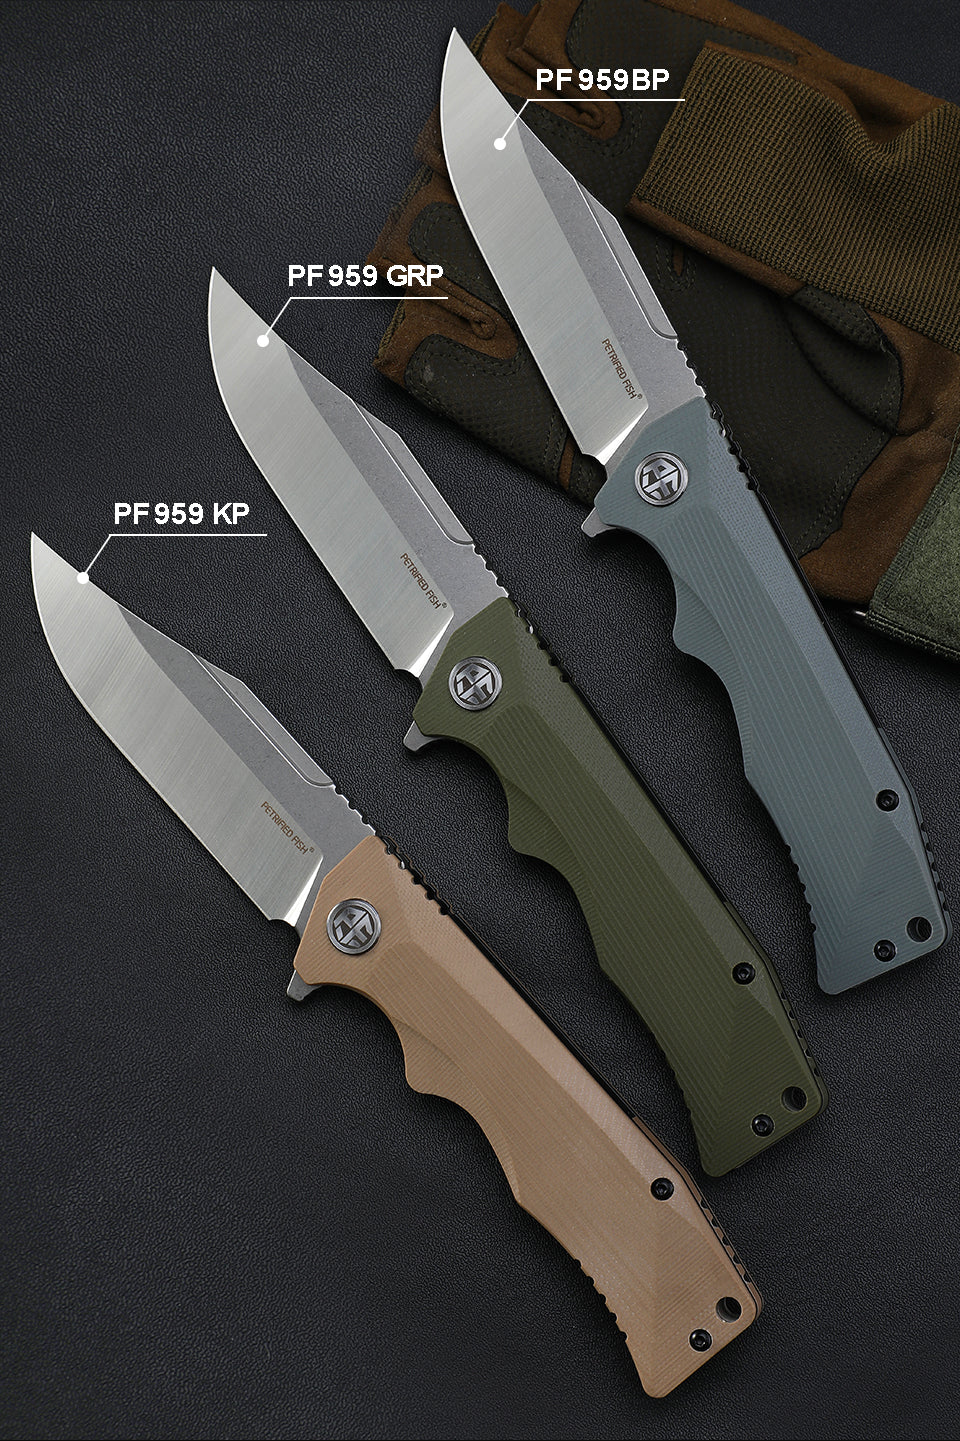 PF959 Petrified fish G10 handle D2 steel hunting knife outdoor survival EDC pocket tool hiking camping diving folding knives